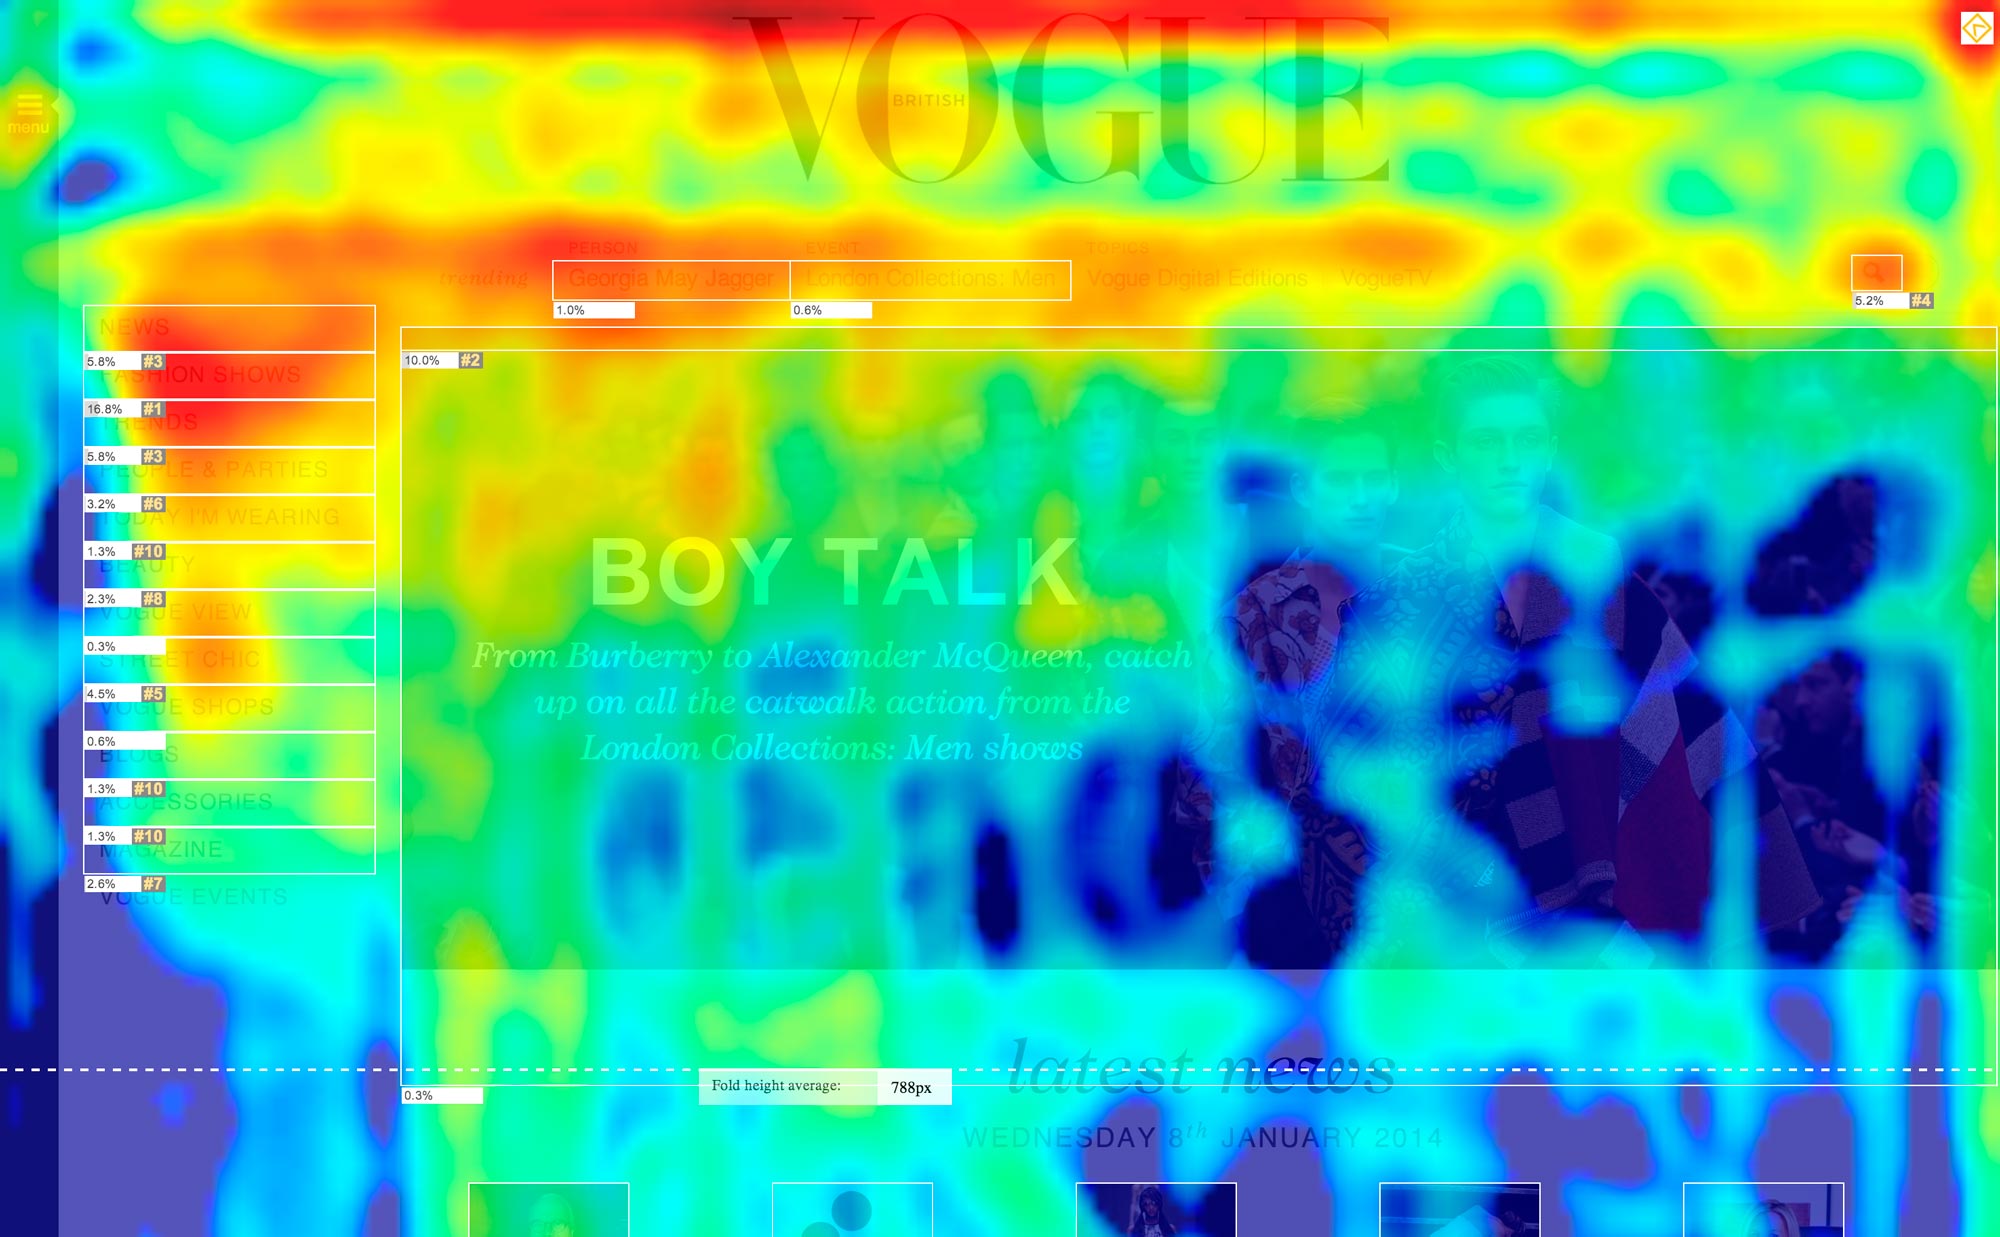 Heatmap showing usage of the new Vogue.co.uk Homepage